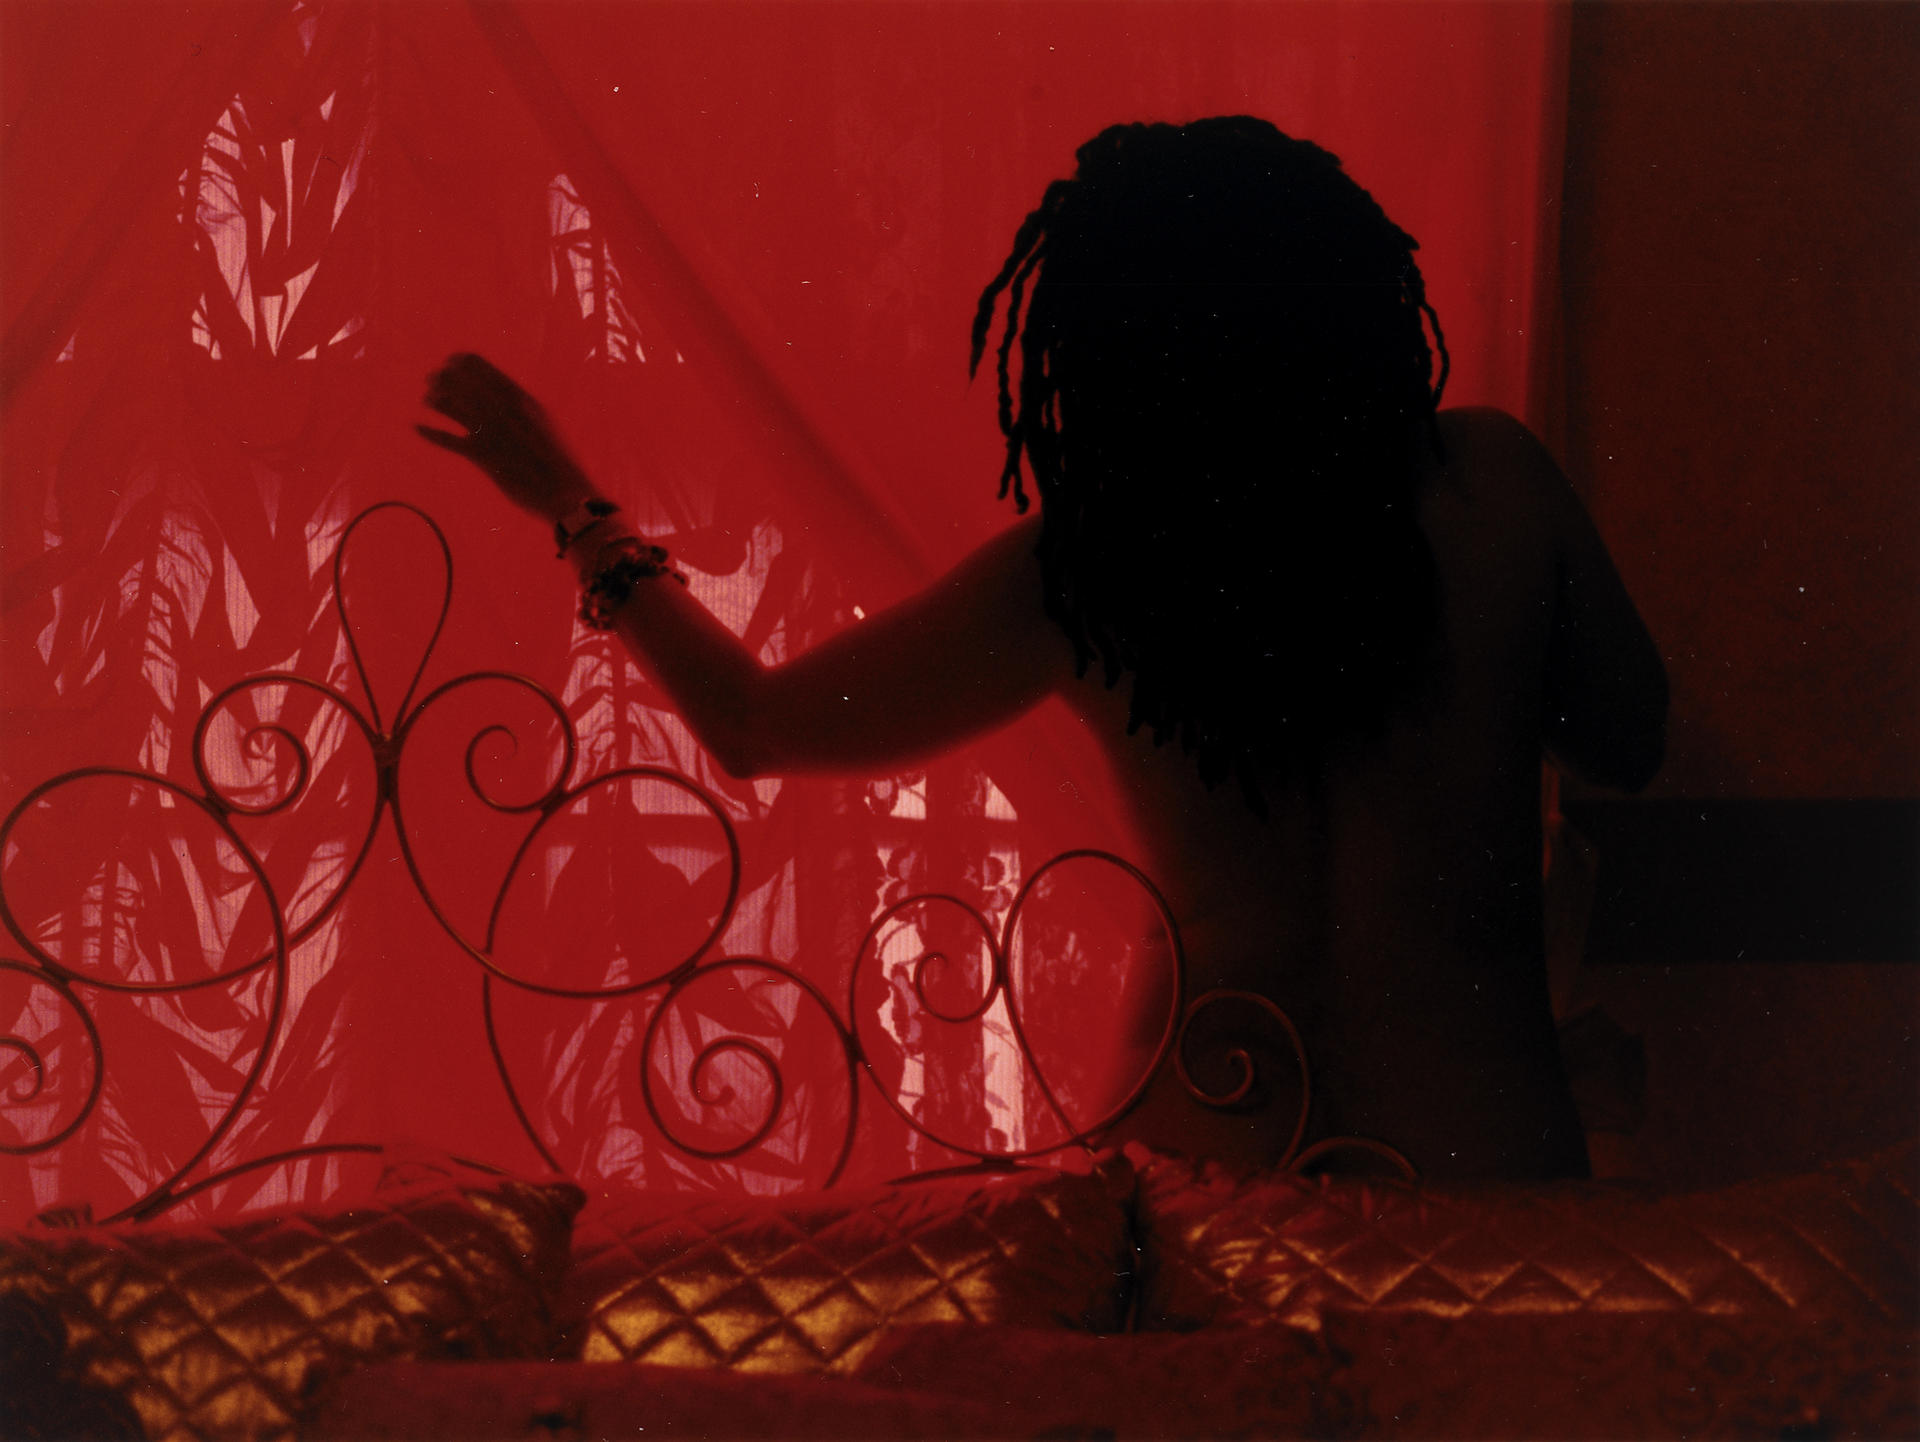 Photograph of a person with outstretched arm sillhouetted against a red window